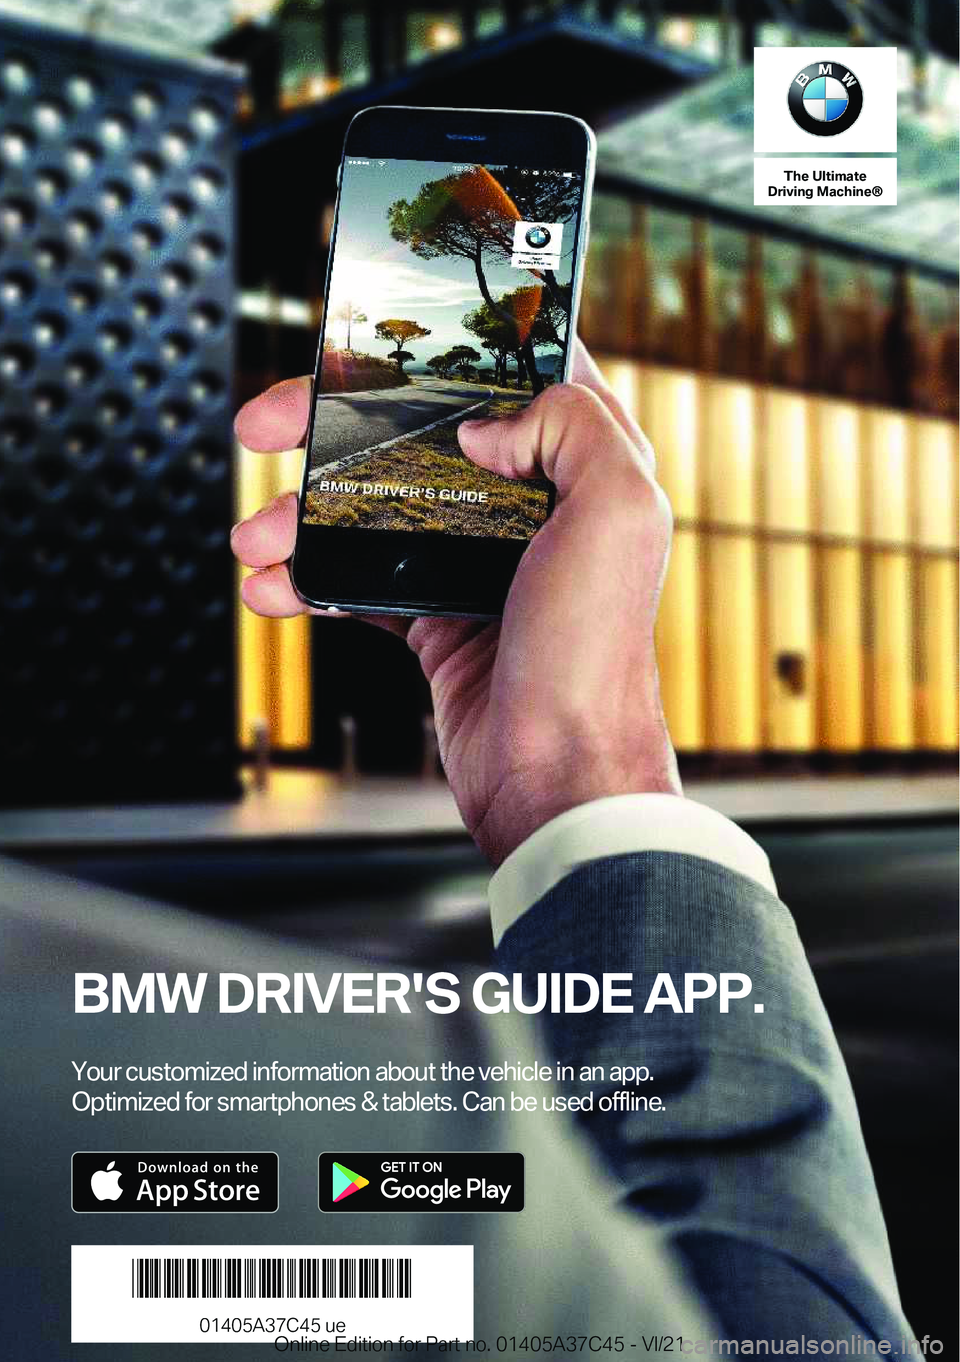 BMW X4 M 2022  Owners Manual �T�h�e��U�l�t�i�m�a�t�e
�D�r�i�v�i�n�g��M�a�c�h�i�n�e�n
�B�M�W��D�R�I�V�E�R�'�S��G�U�I�D�E��A�P�P�.
�Y�o�u�r��c�u�s�t�o�m�i�z�e�d��i�n�f�o�r�m�a�t�i�o�n��a�b�o�u�t��t�h�e��v�e�h�i�c�l�e�